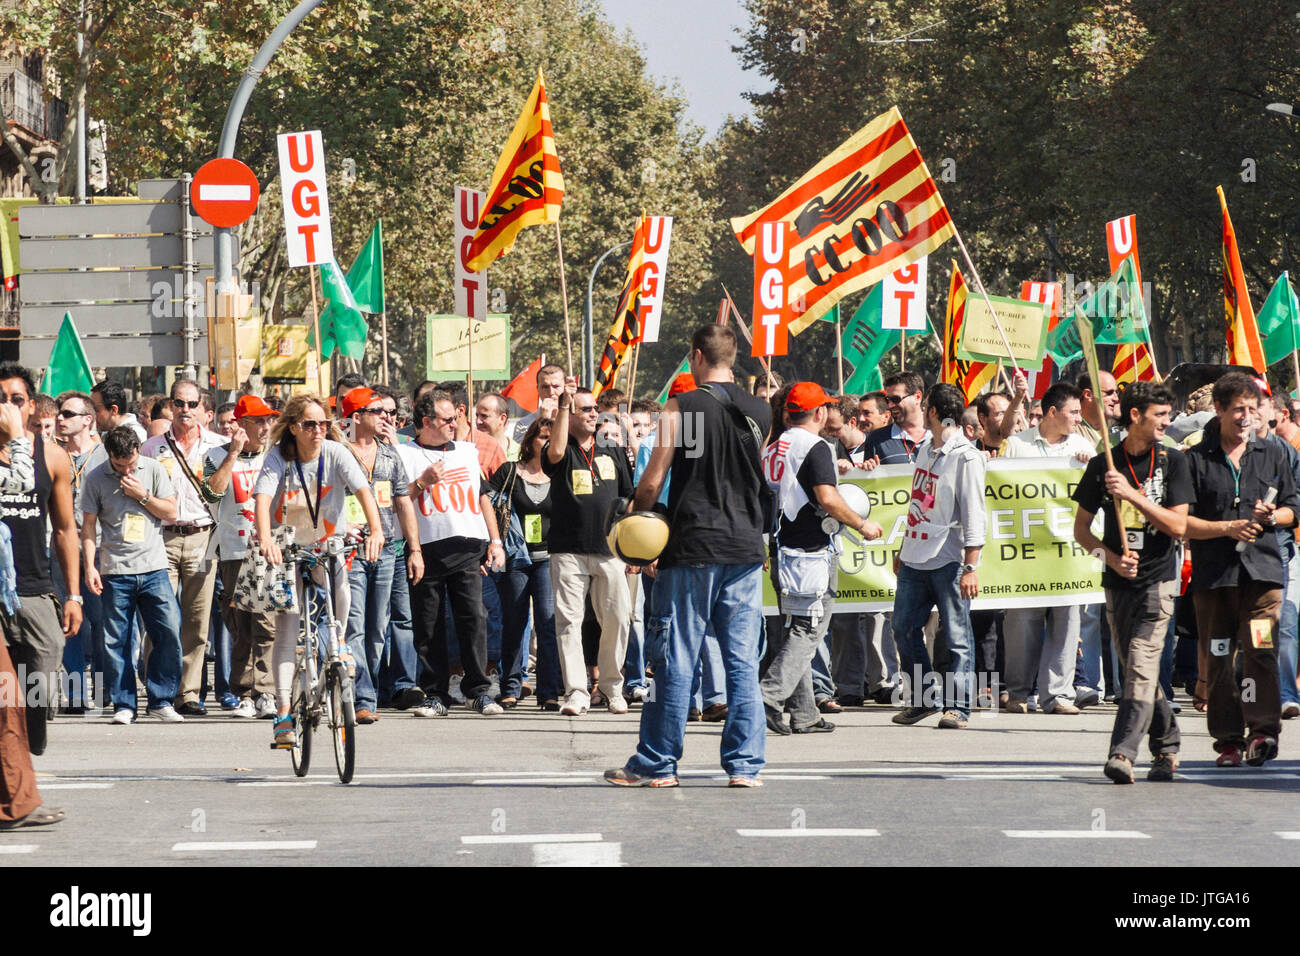 Union demonstration against increase de-localization of factories in Catalonia and Spain Stock Photo